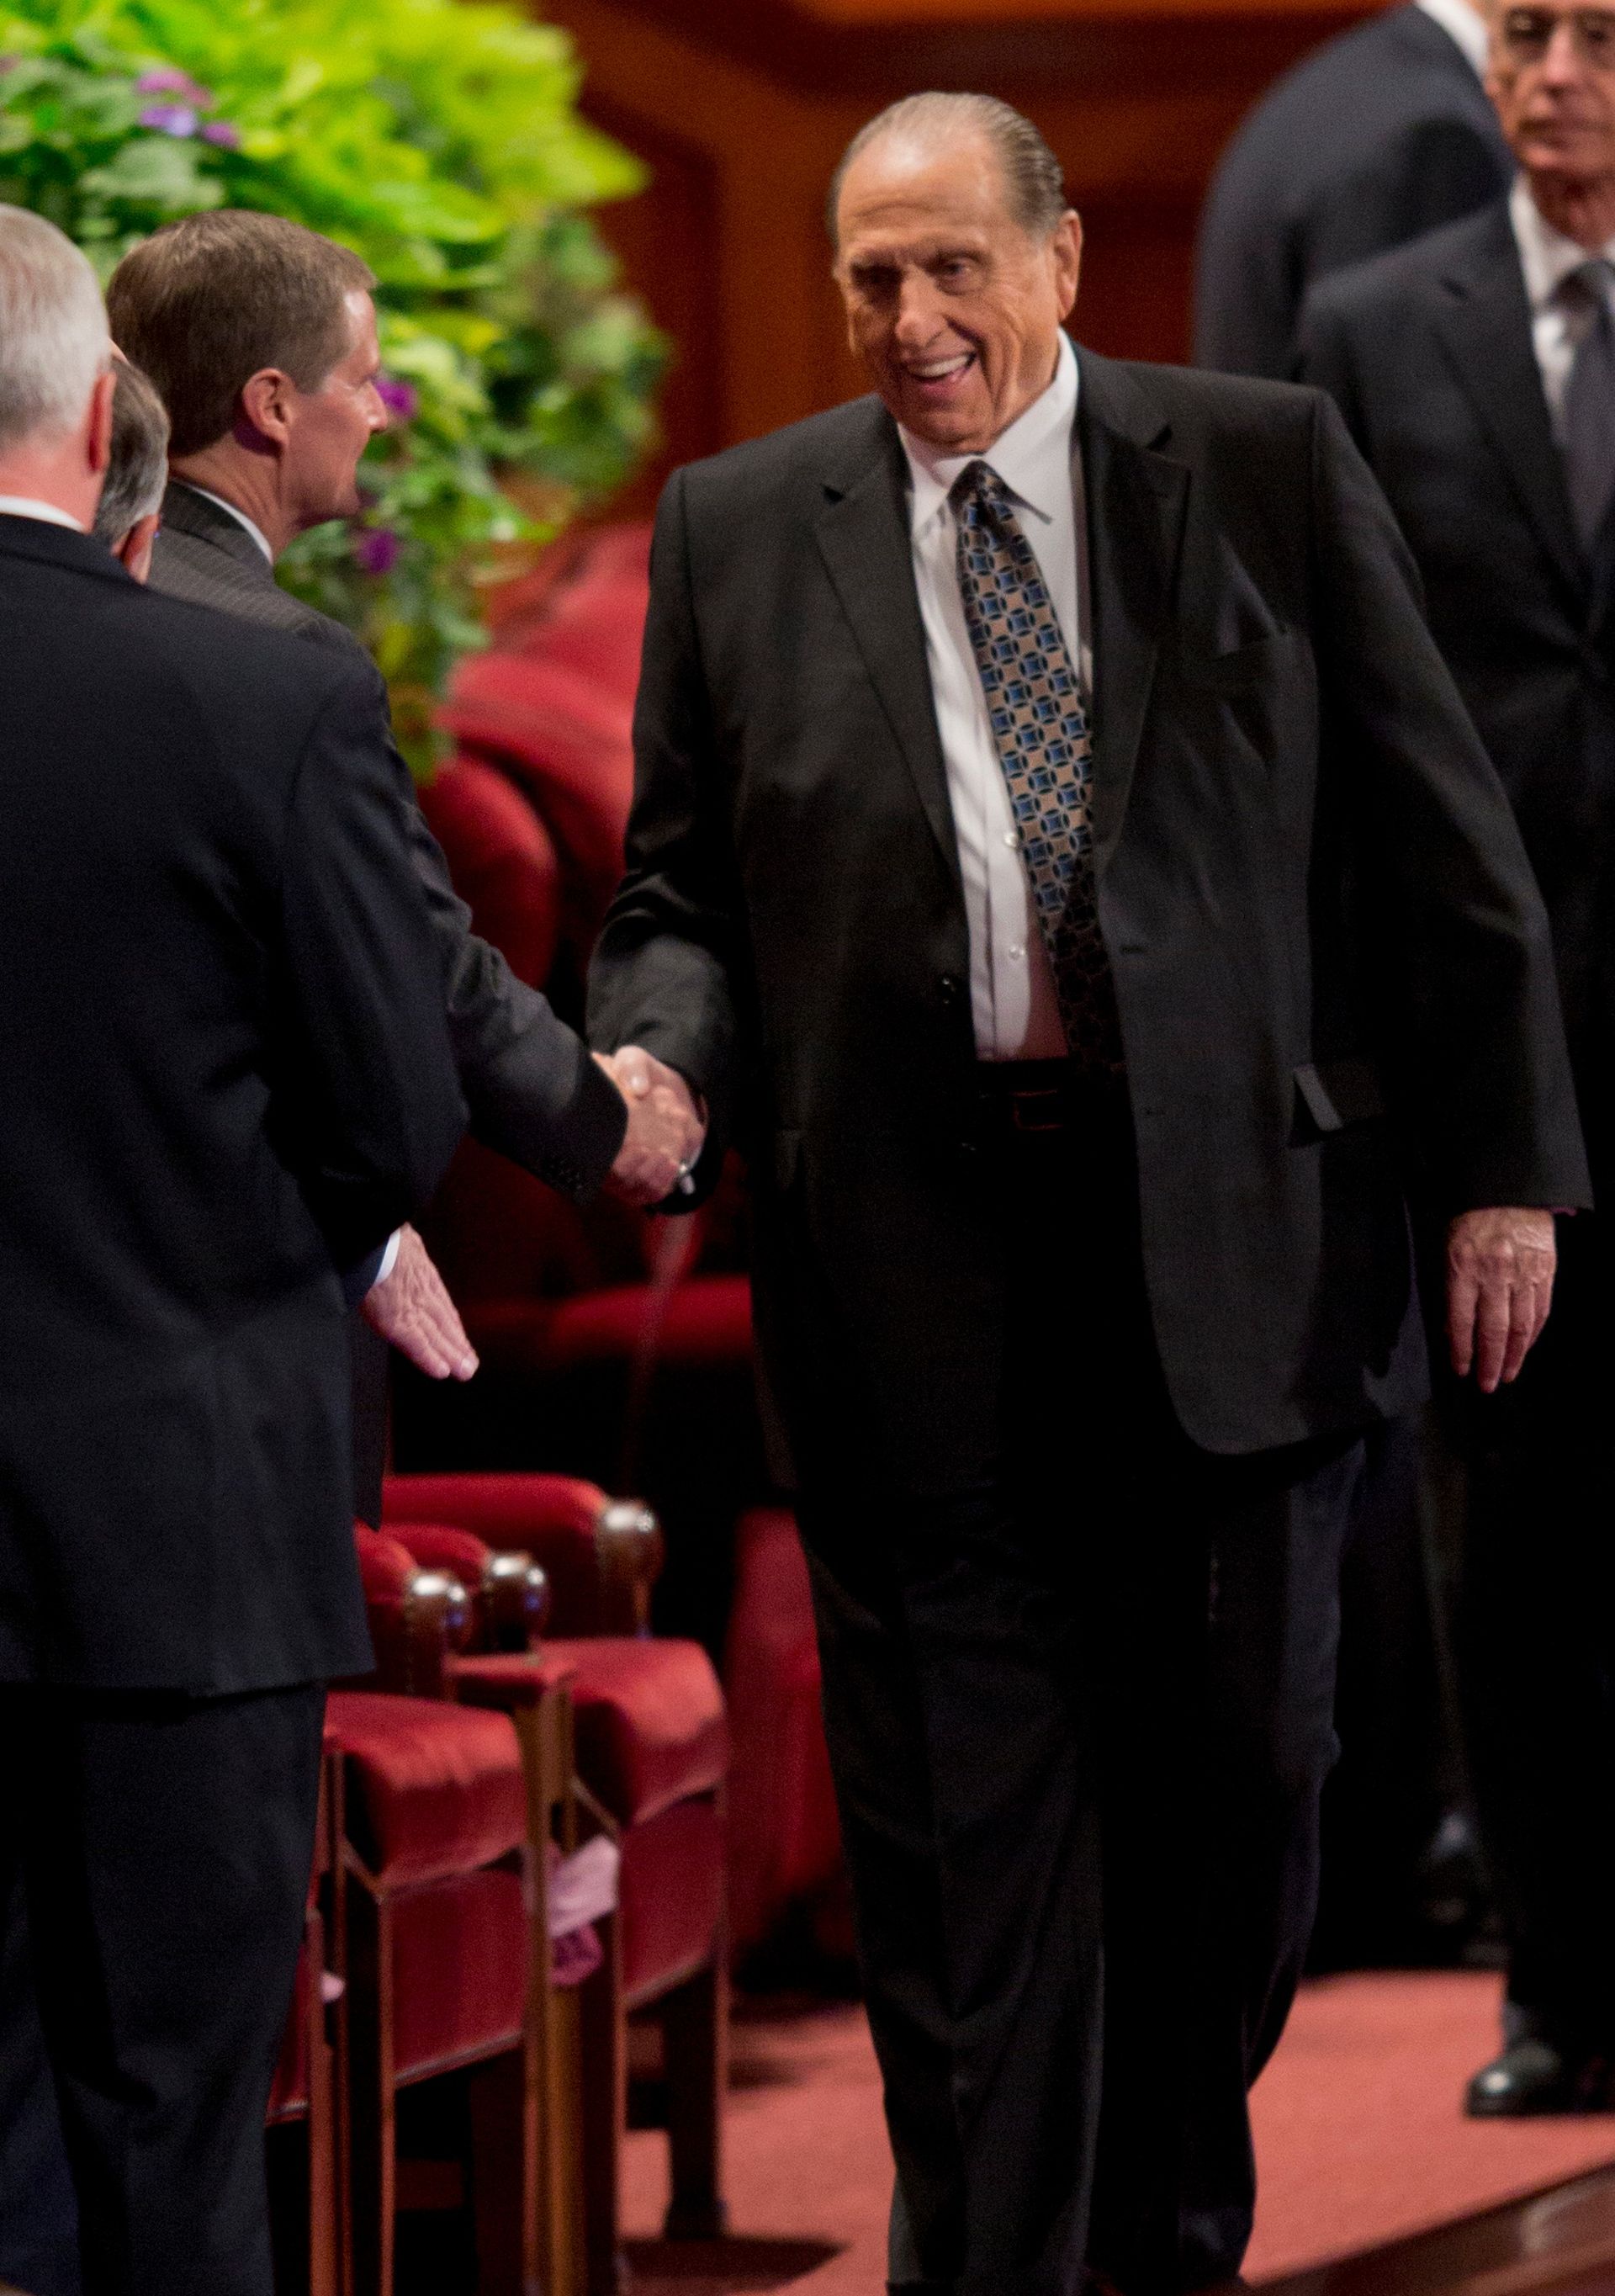 Thomas S. Monson greeting David A. Bednar in the Conference Center.